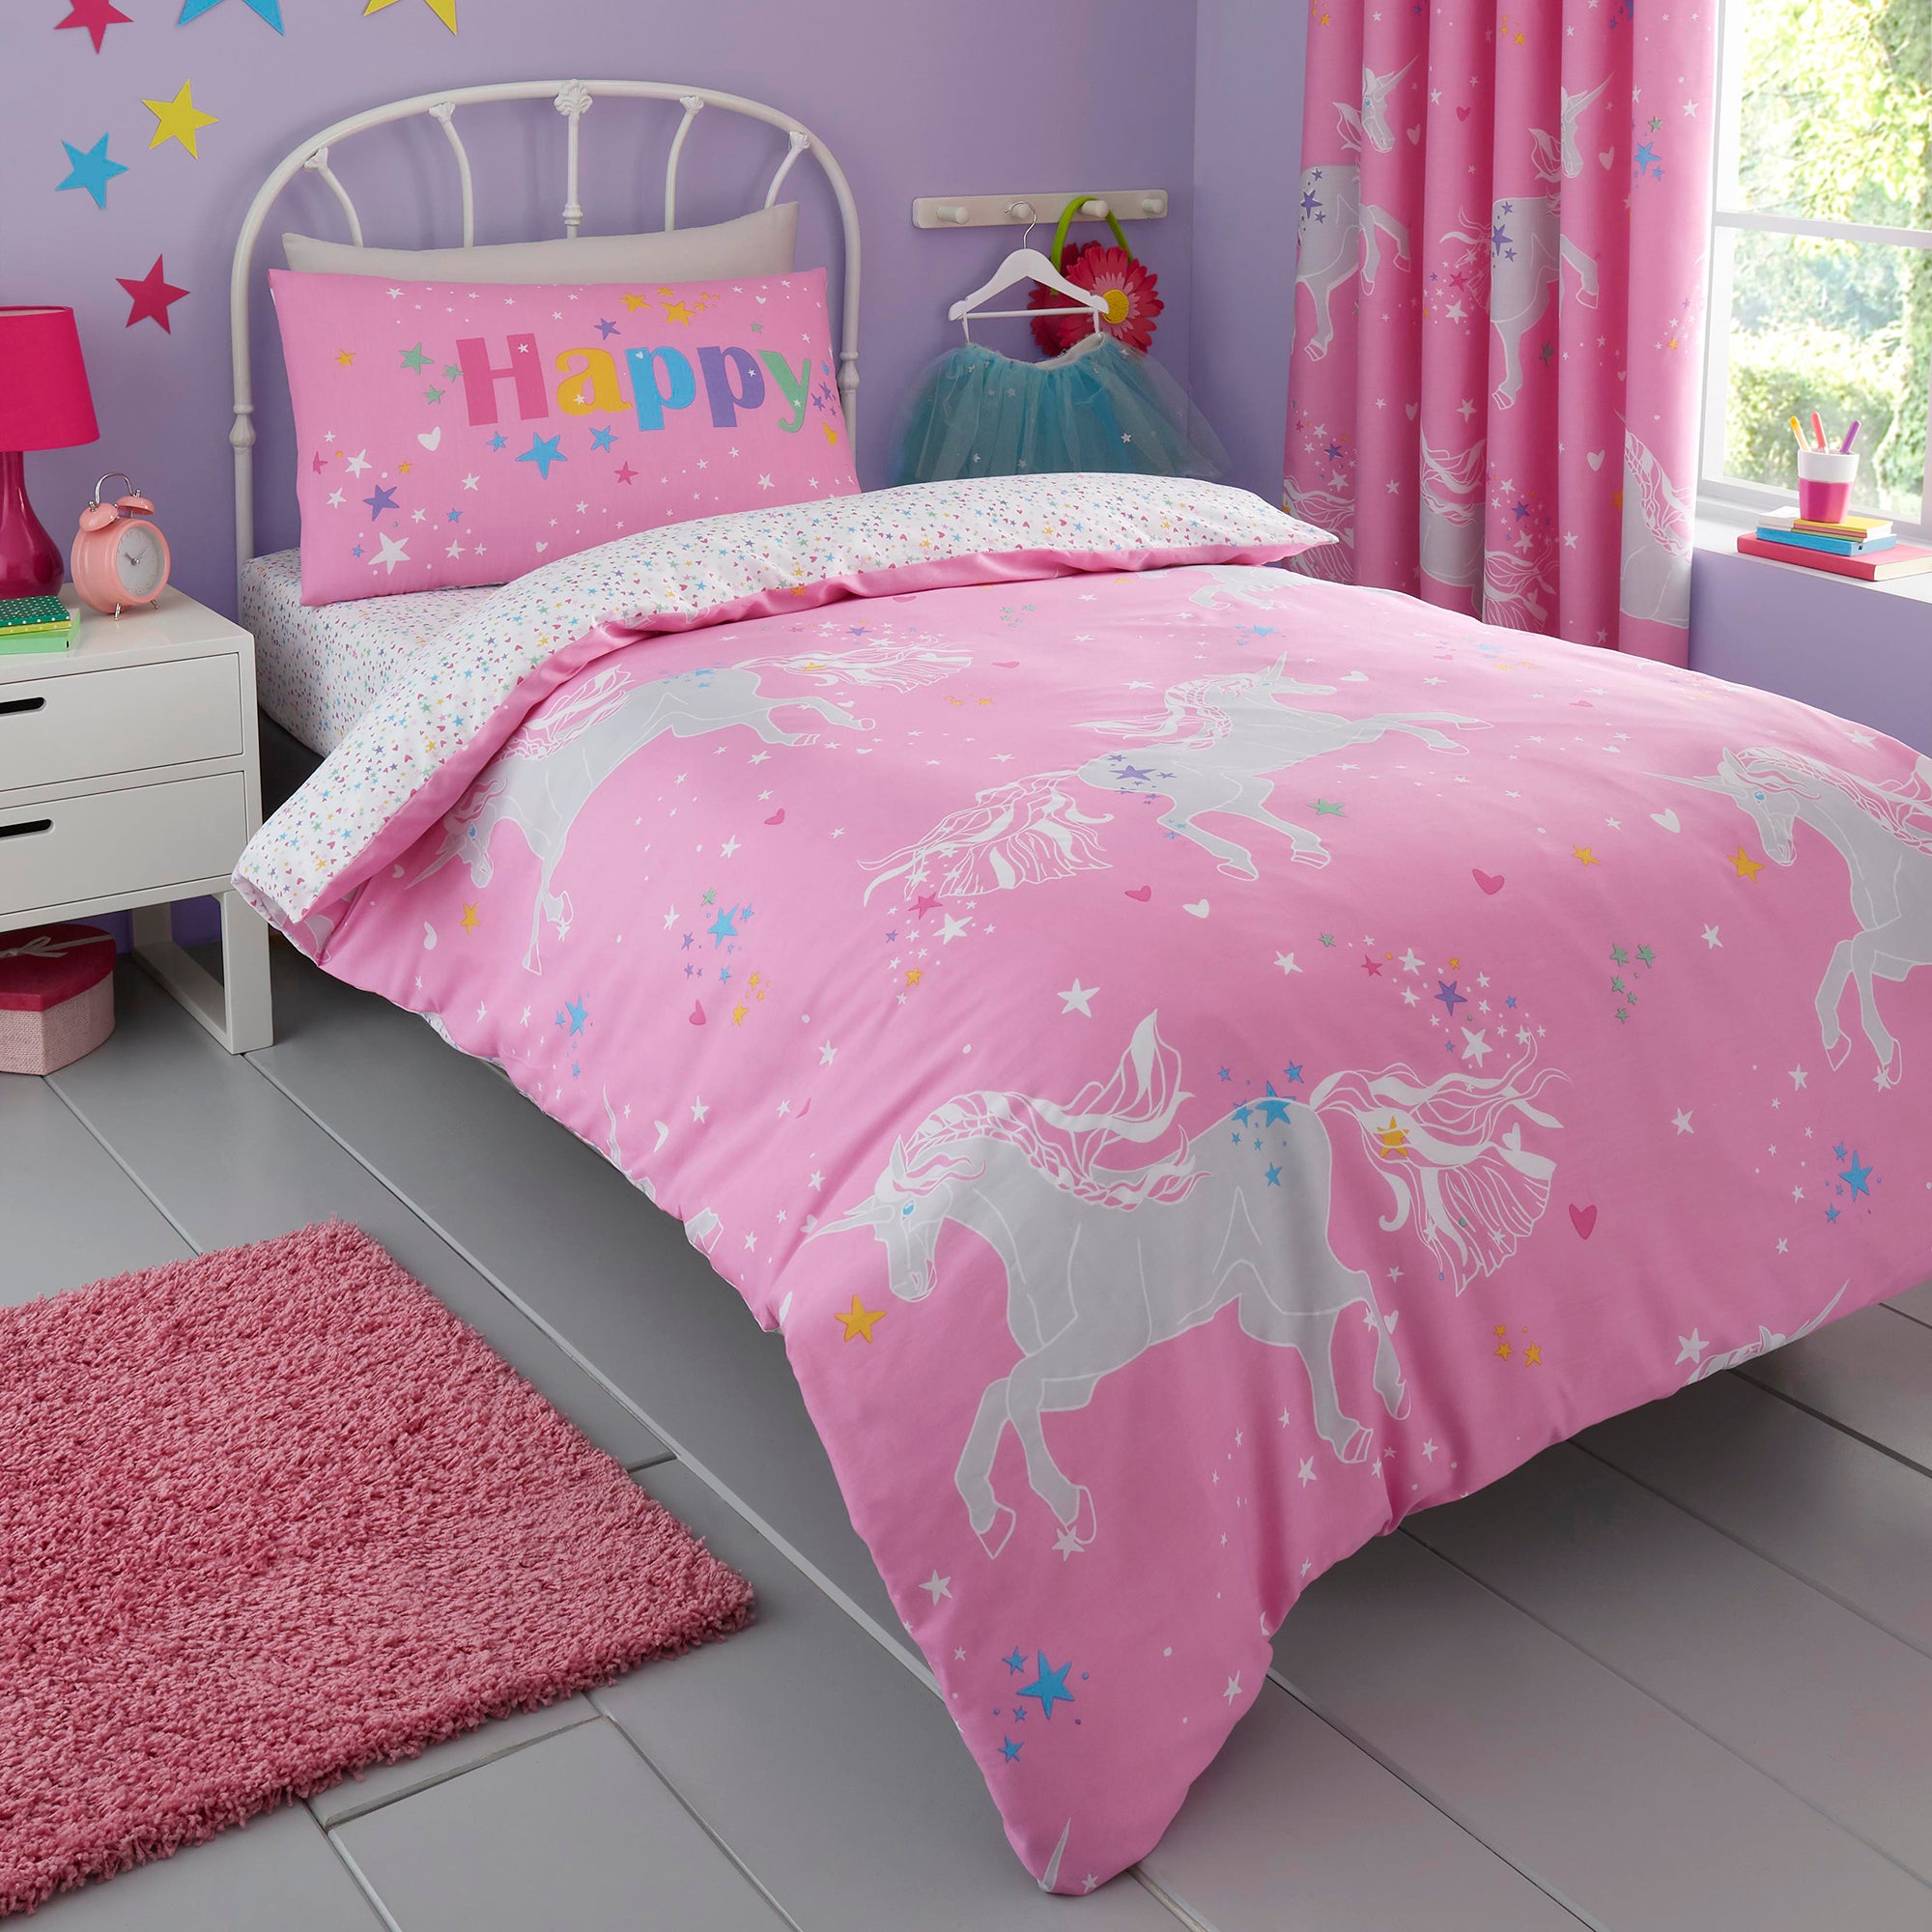 Unicorn Glow - Glow in the Dark Duvet Cover Set, Curtains & Fitted Sheets in Pink - by Bedlam